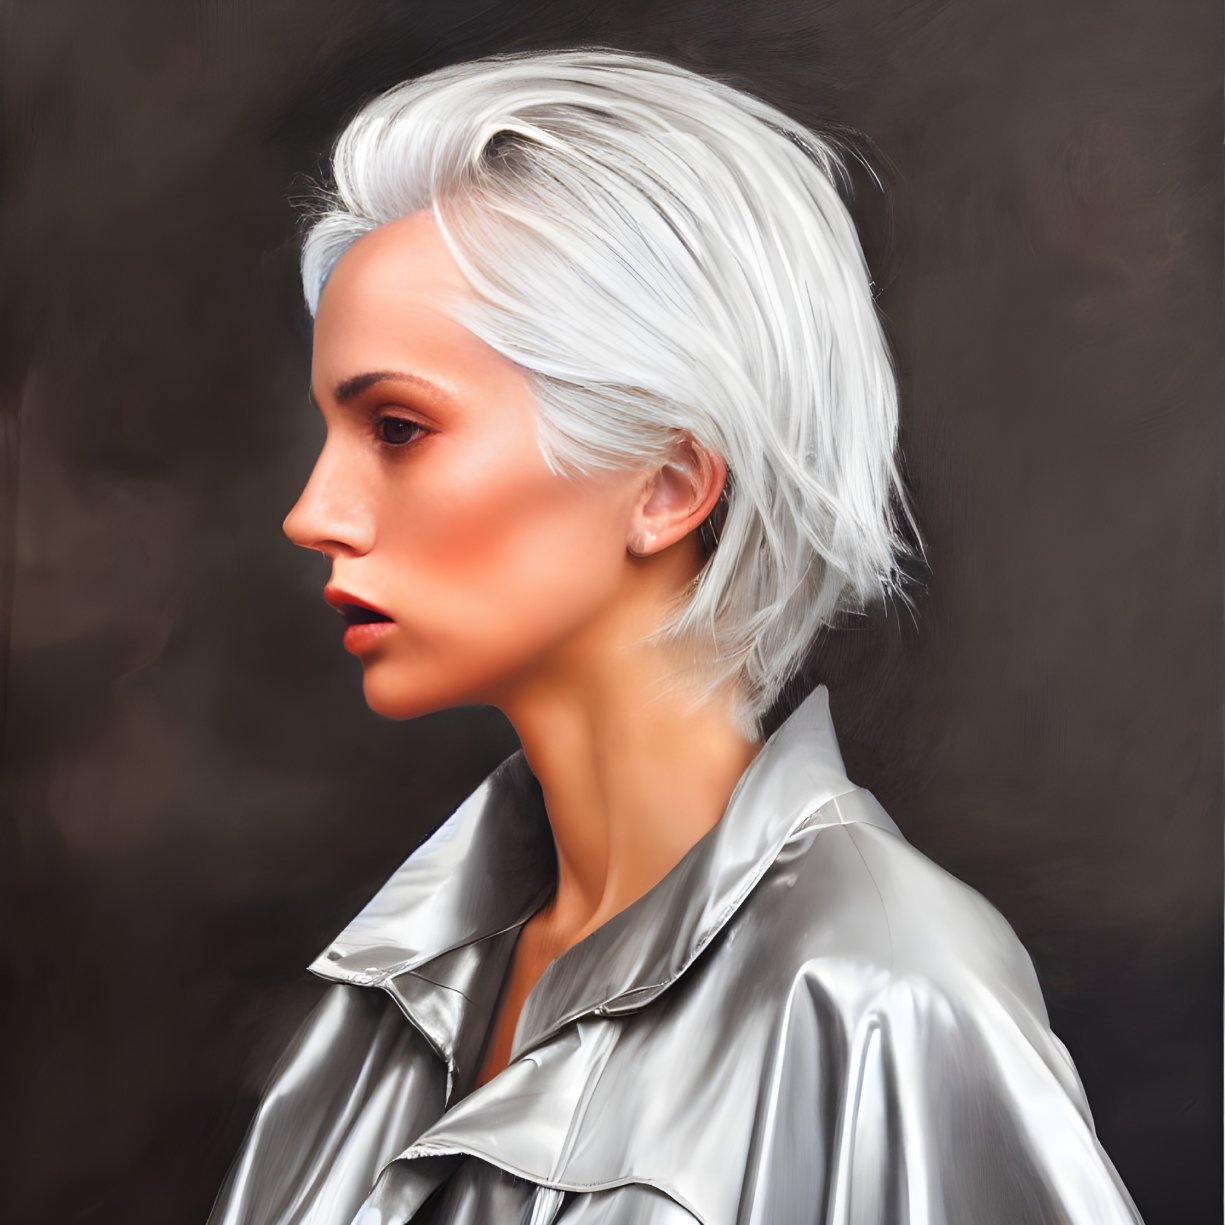 Profile of person with short white hair in metallic garment